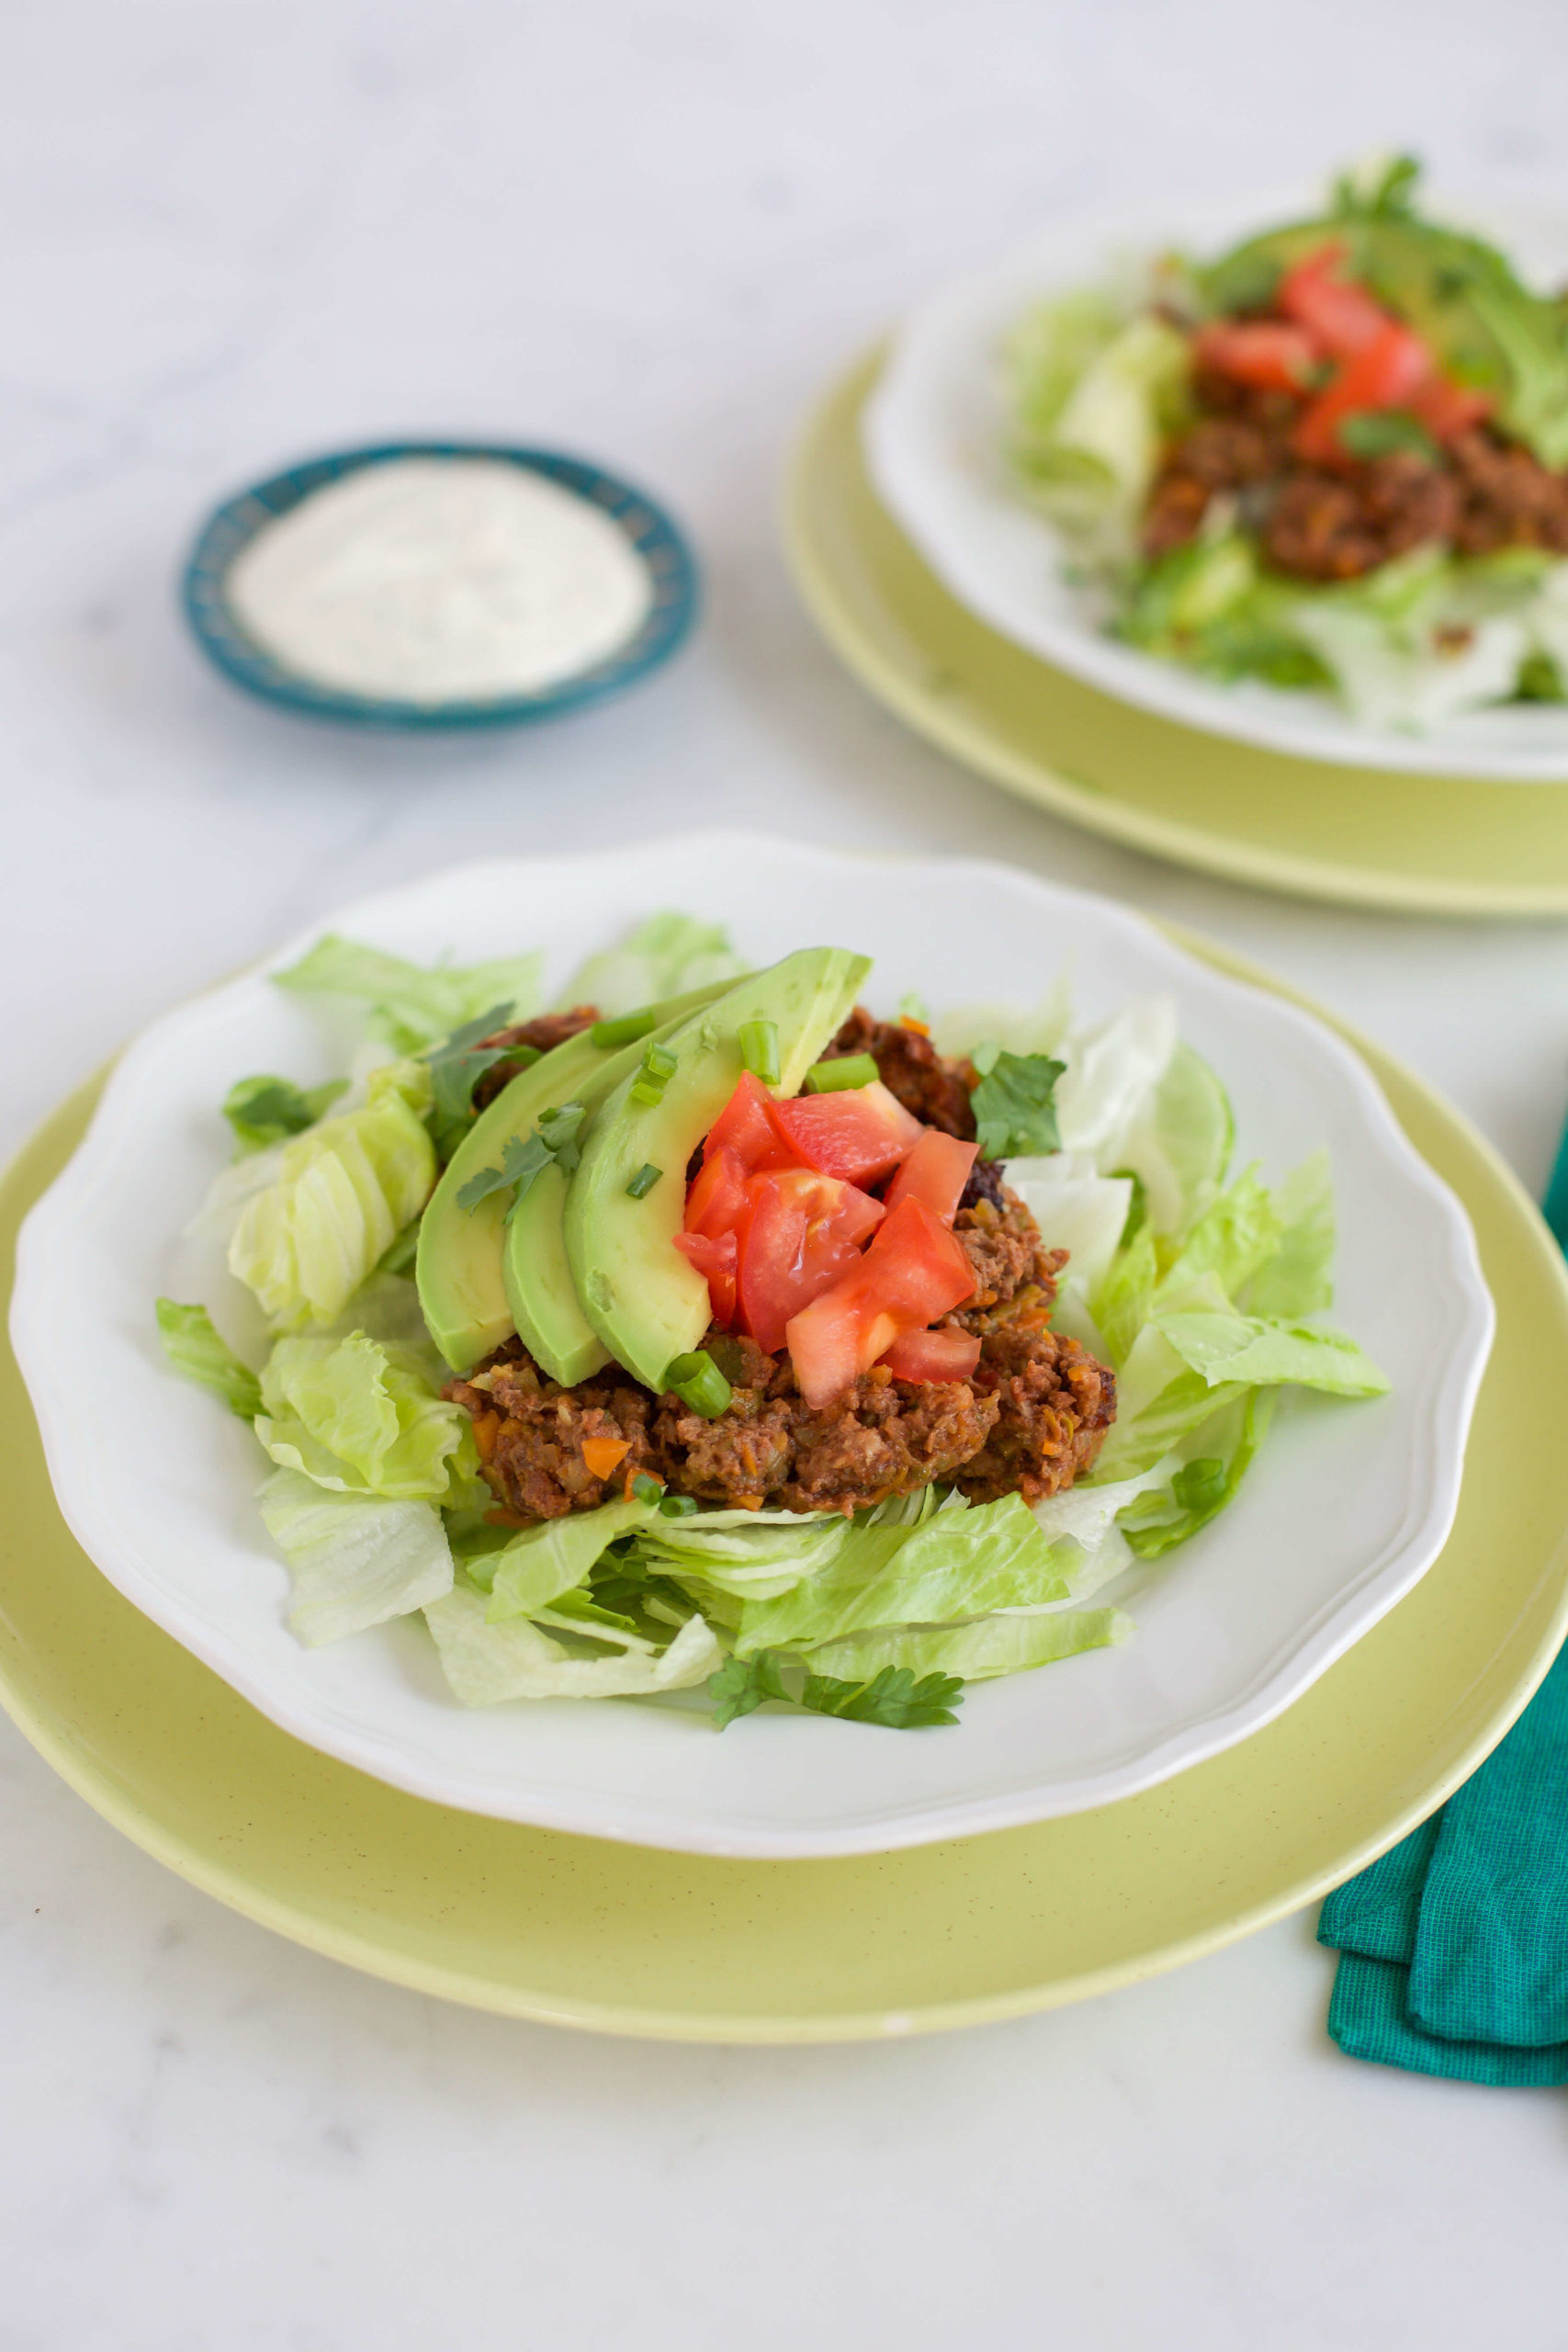 Make taco night a breeze with this tender and flavorful Slow Cooker Taco Meat recipe. Dump ground beef and simple spices in your slow cooker and dinner is done! This will become your families favorite taco!